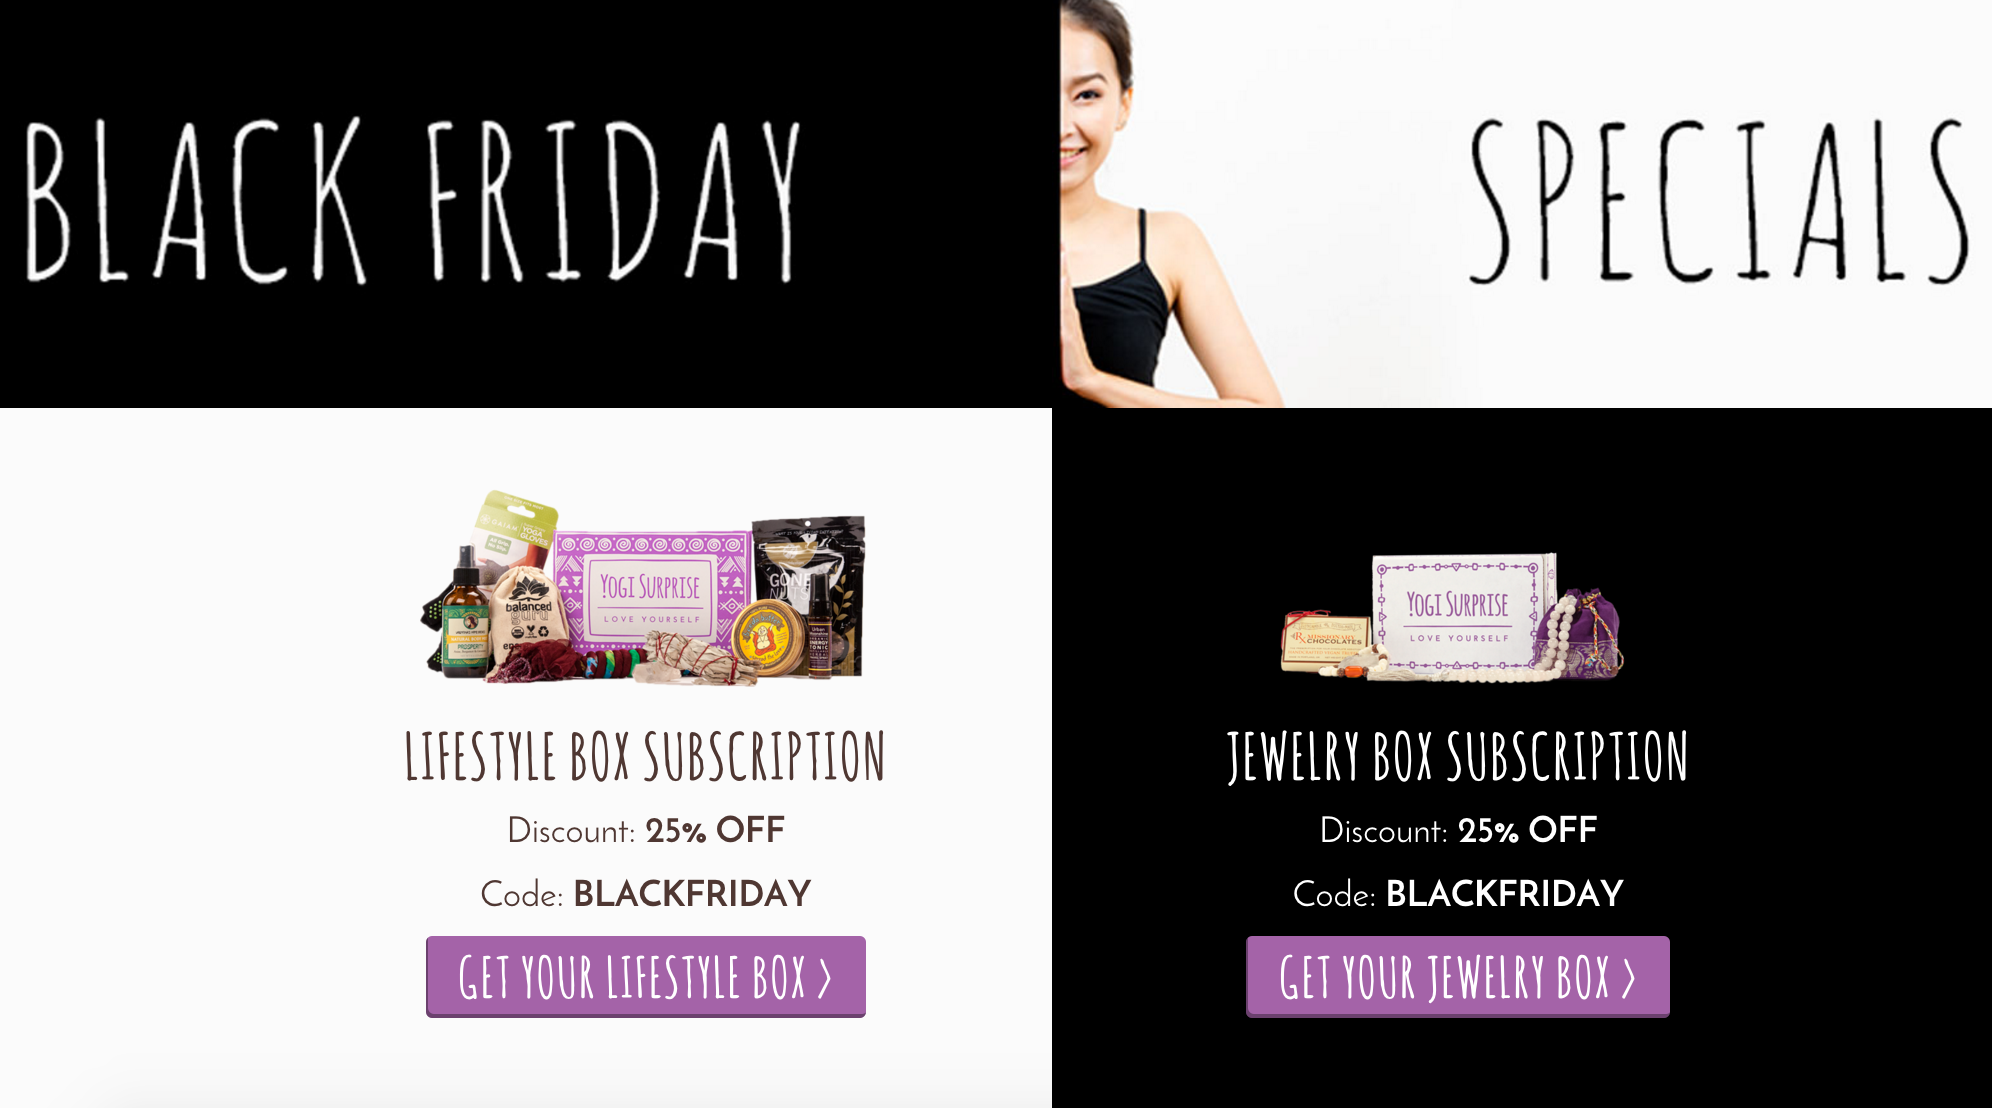 Yogi Surprise Black Friday Deal – 30% Off Your First Month!